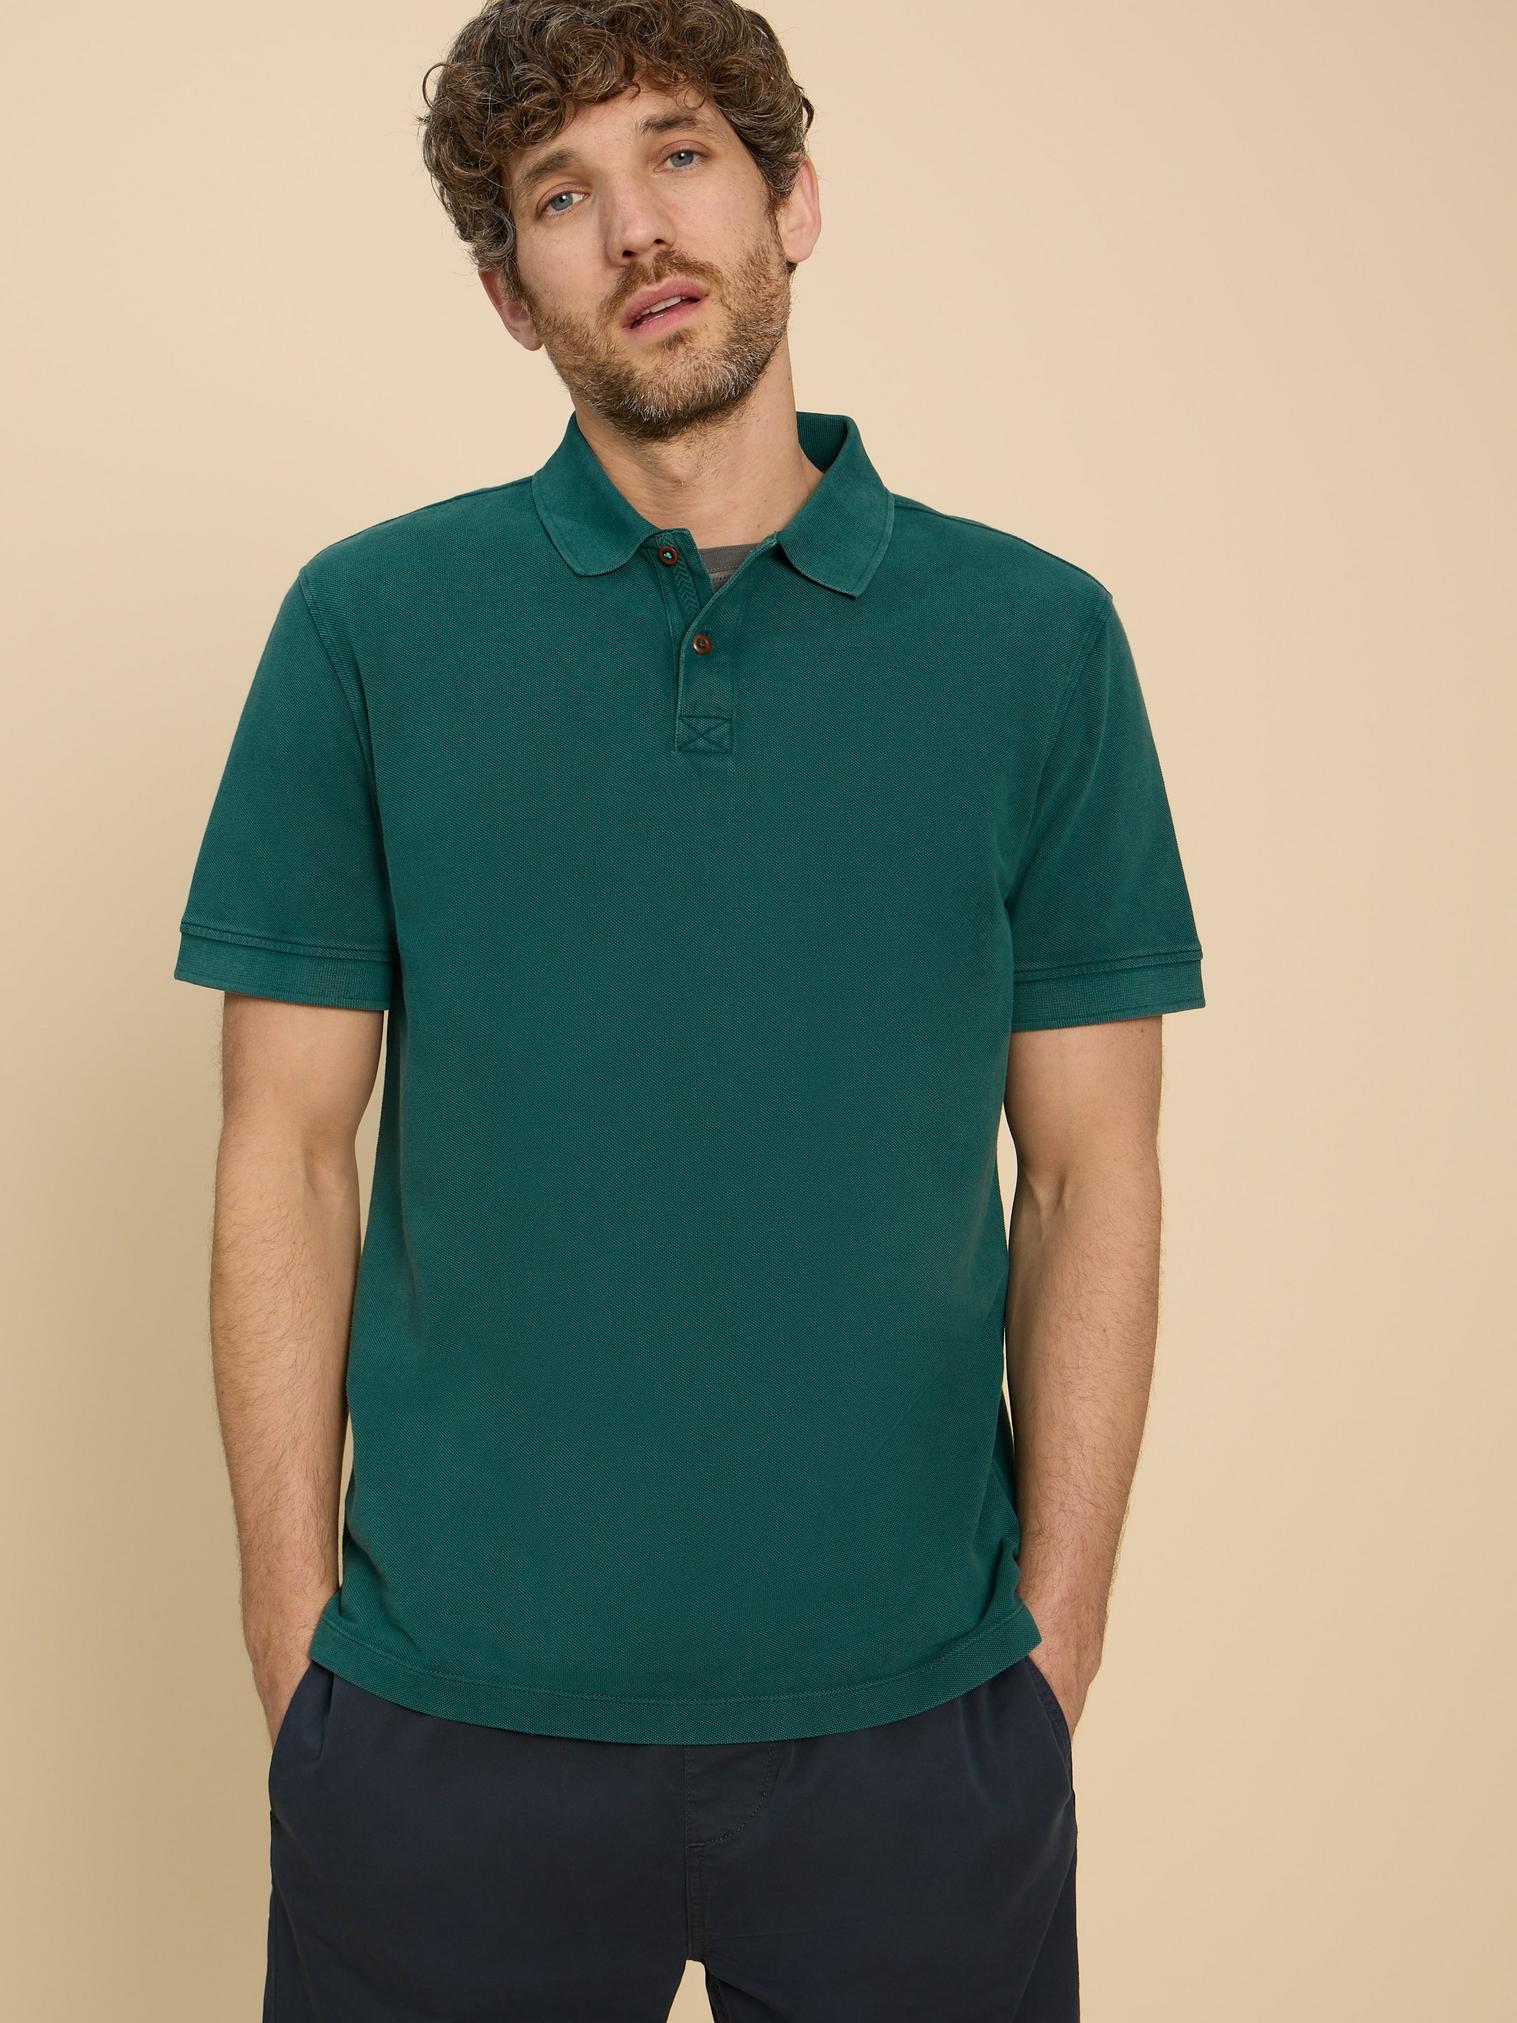 Utility Polo in DK TEAL - LIFESTYLE